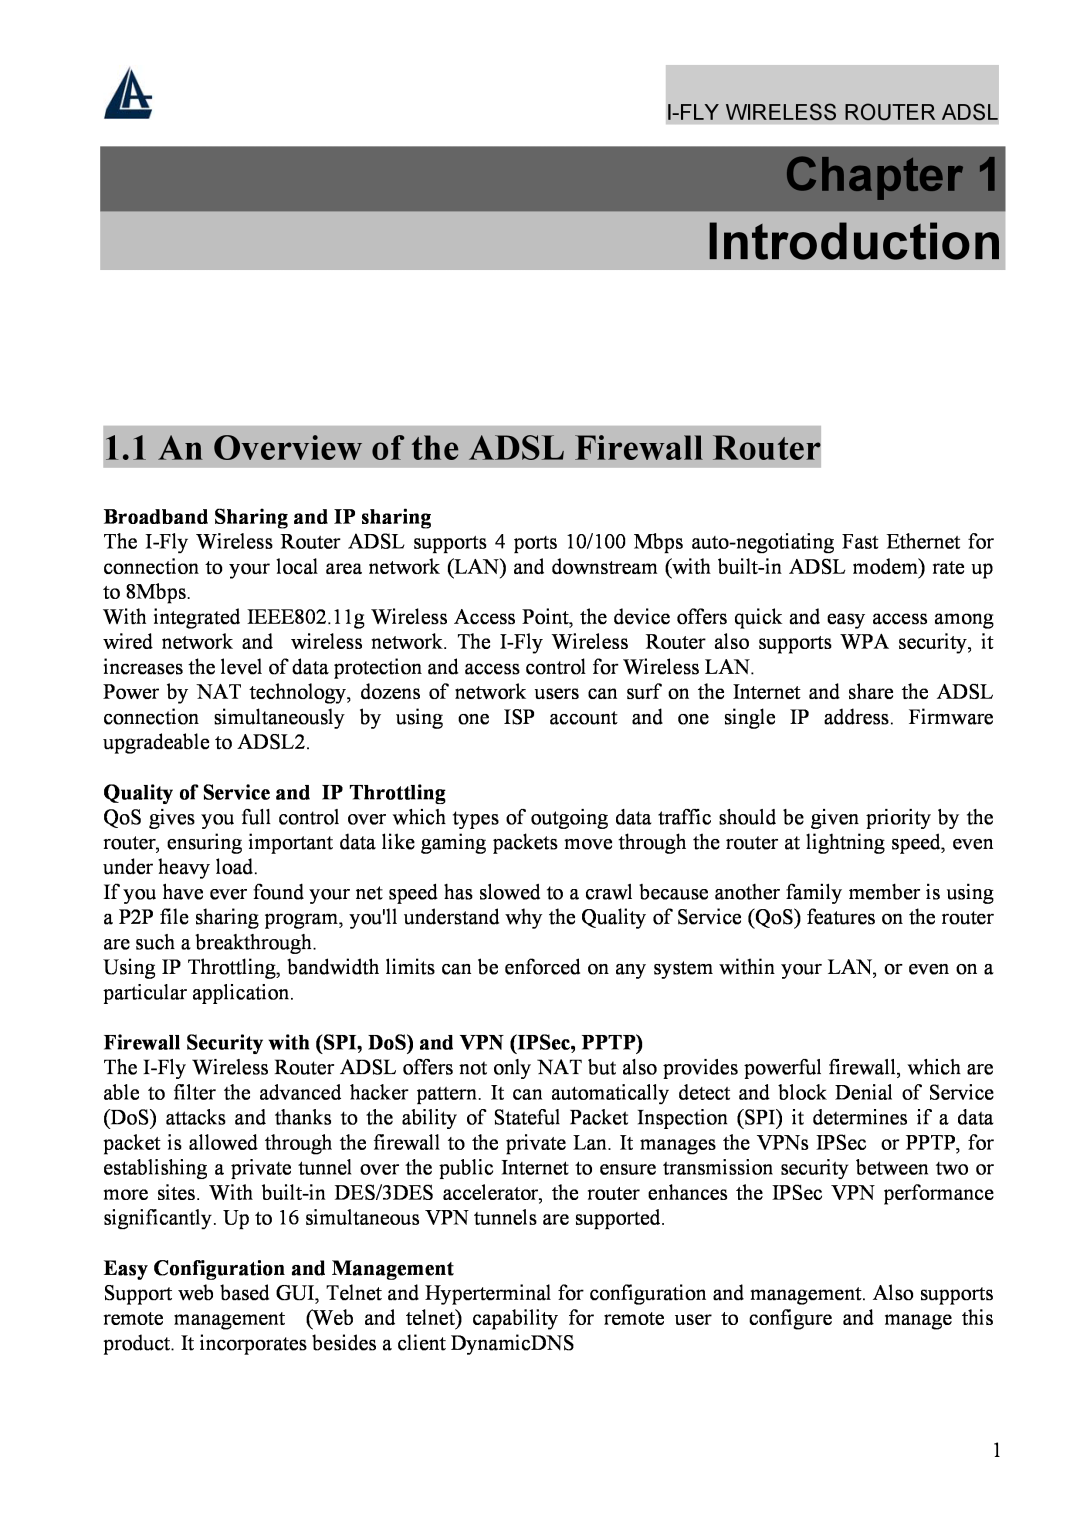 Atlantis Land A02-WRA4-54G manual Introduction, Chapter, An Overview of the ADSL Firewall Router 